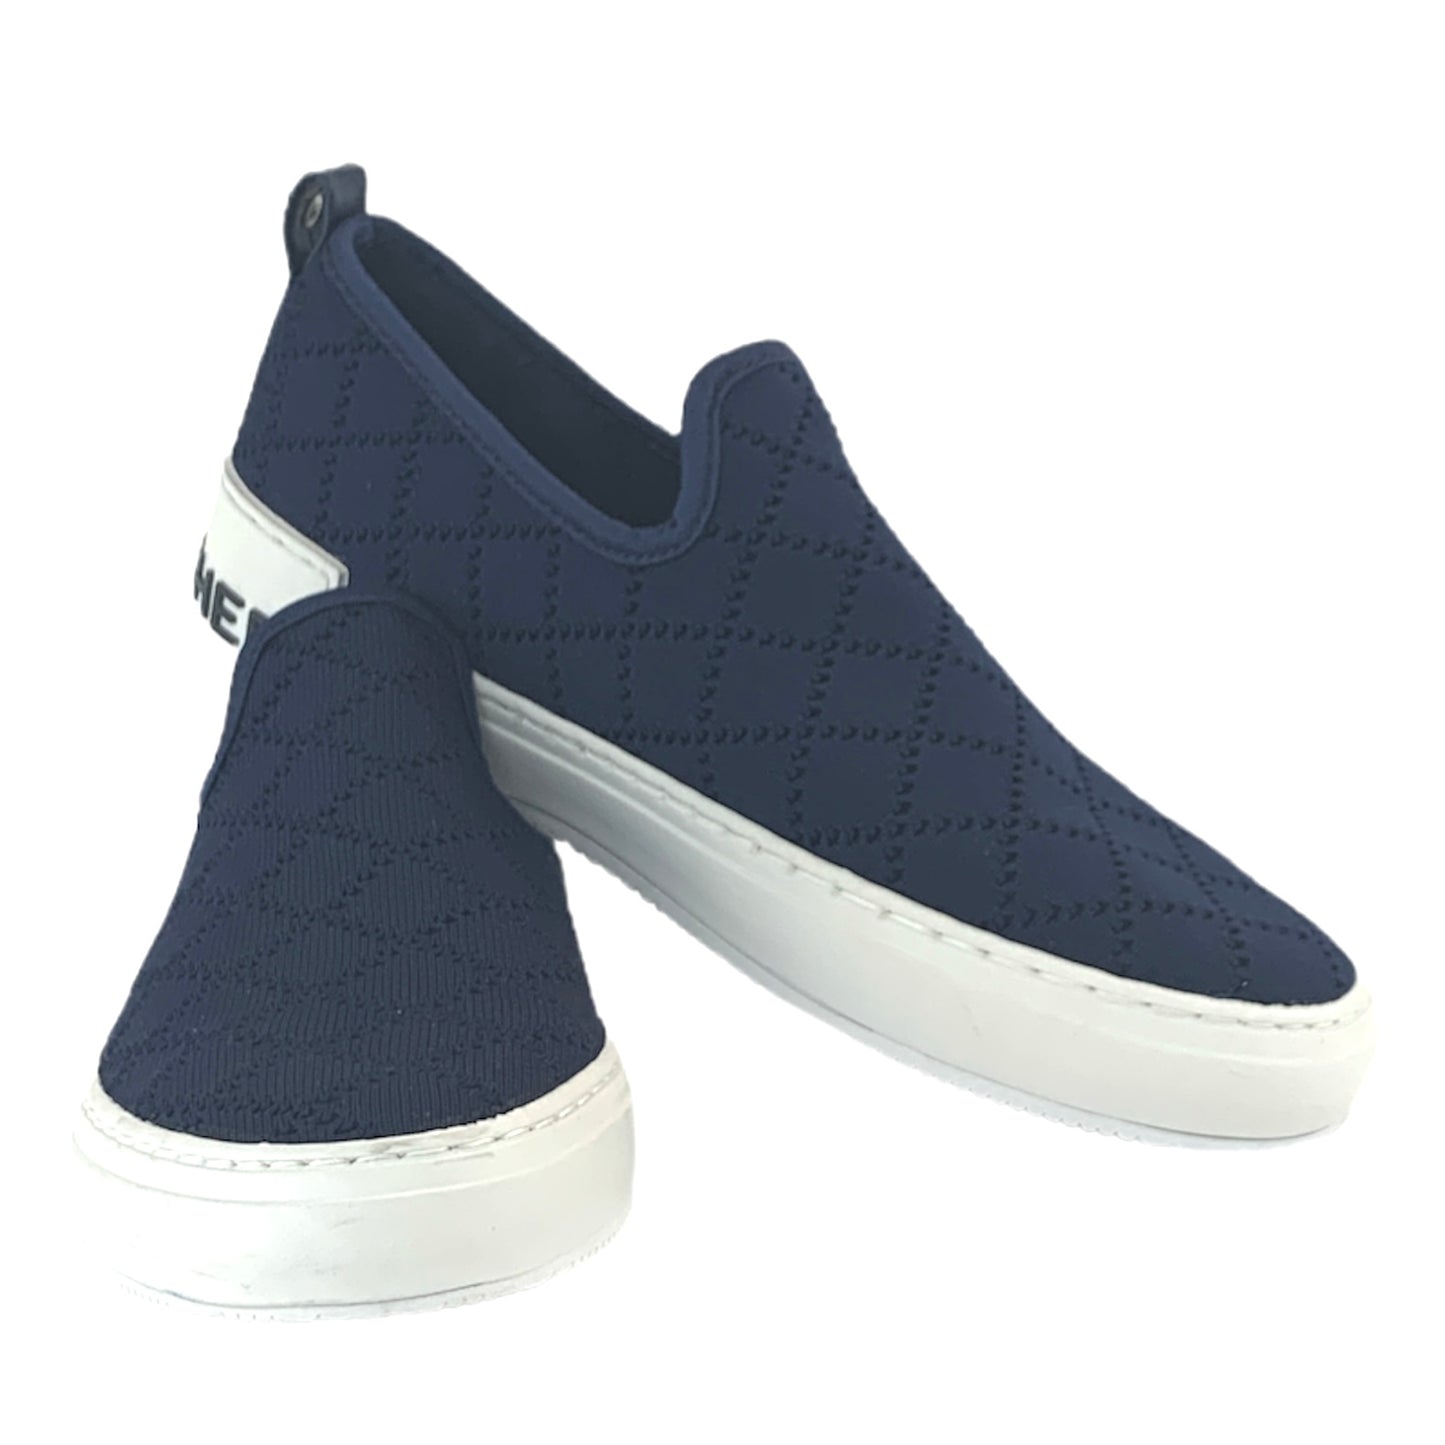 Slip On Low Top Knit Comfort Shoes Women's Fashion Sneakers